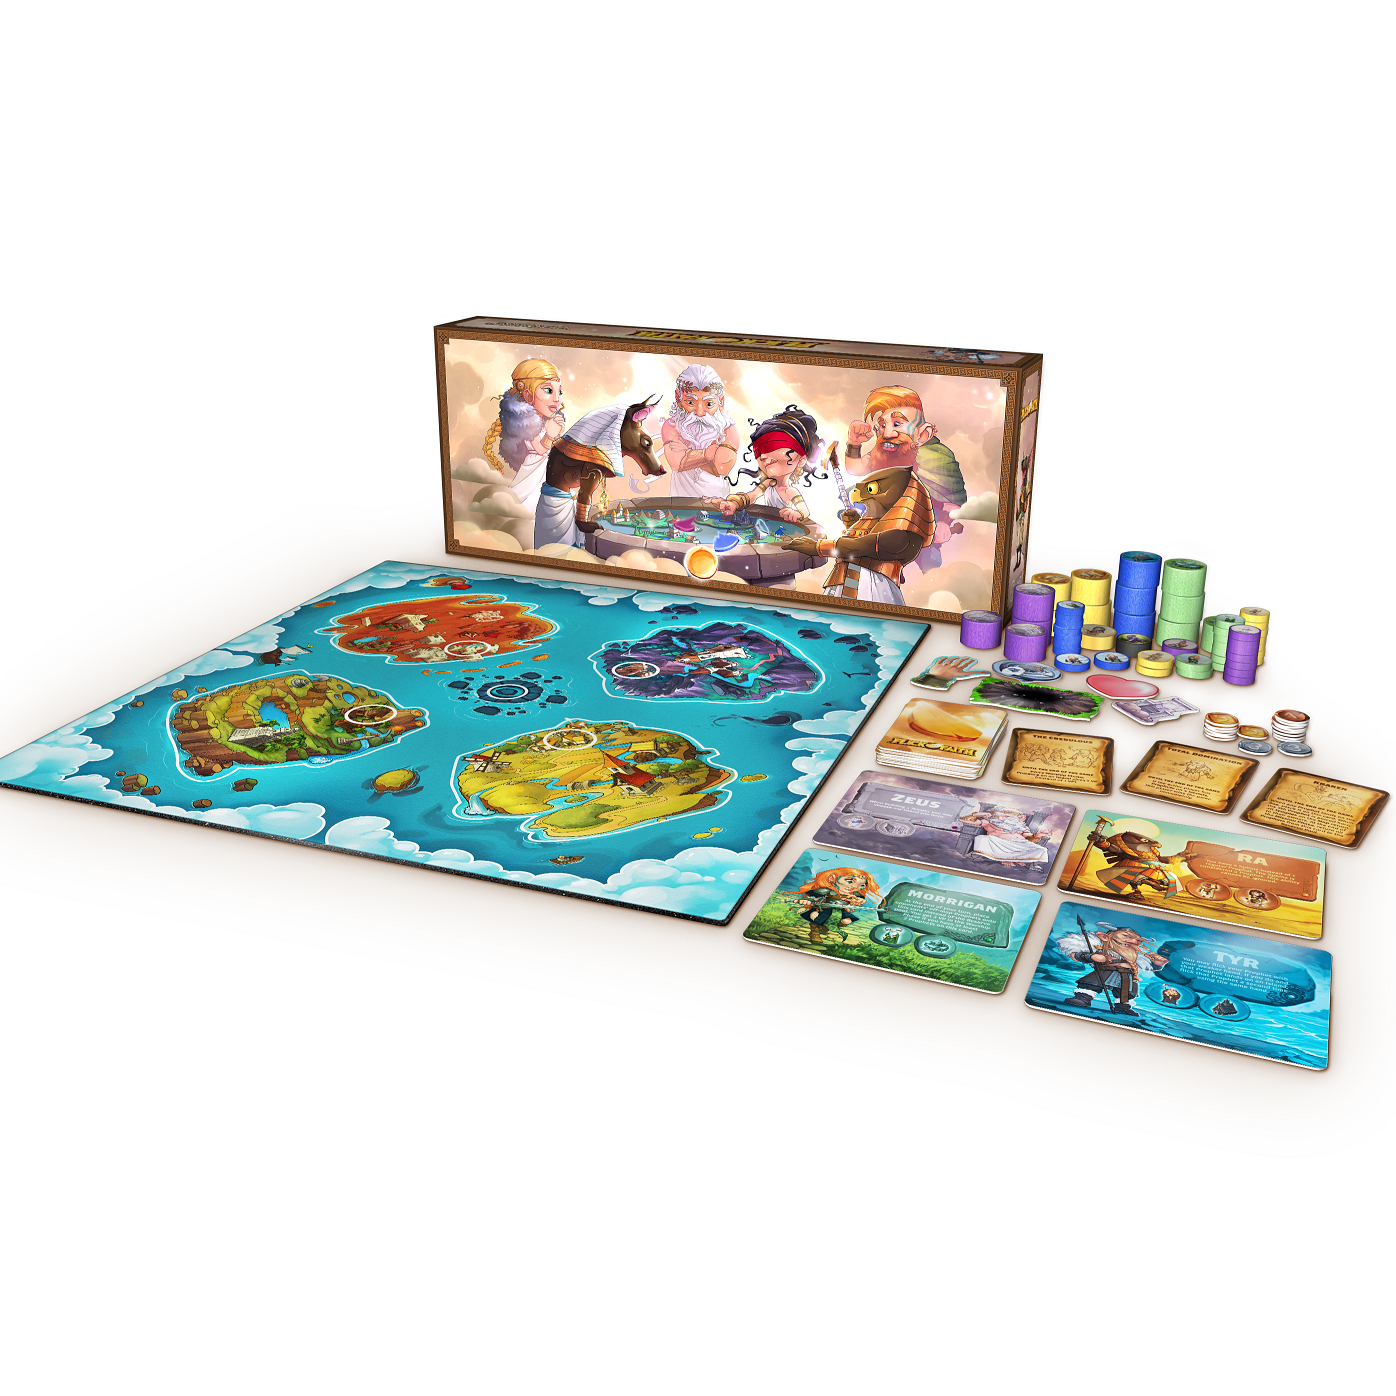 Tournament Fishing: The Deck Building Game by TGG-Games